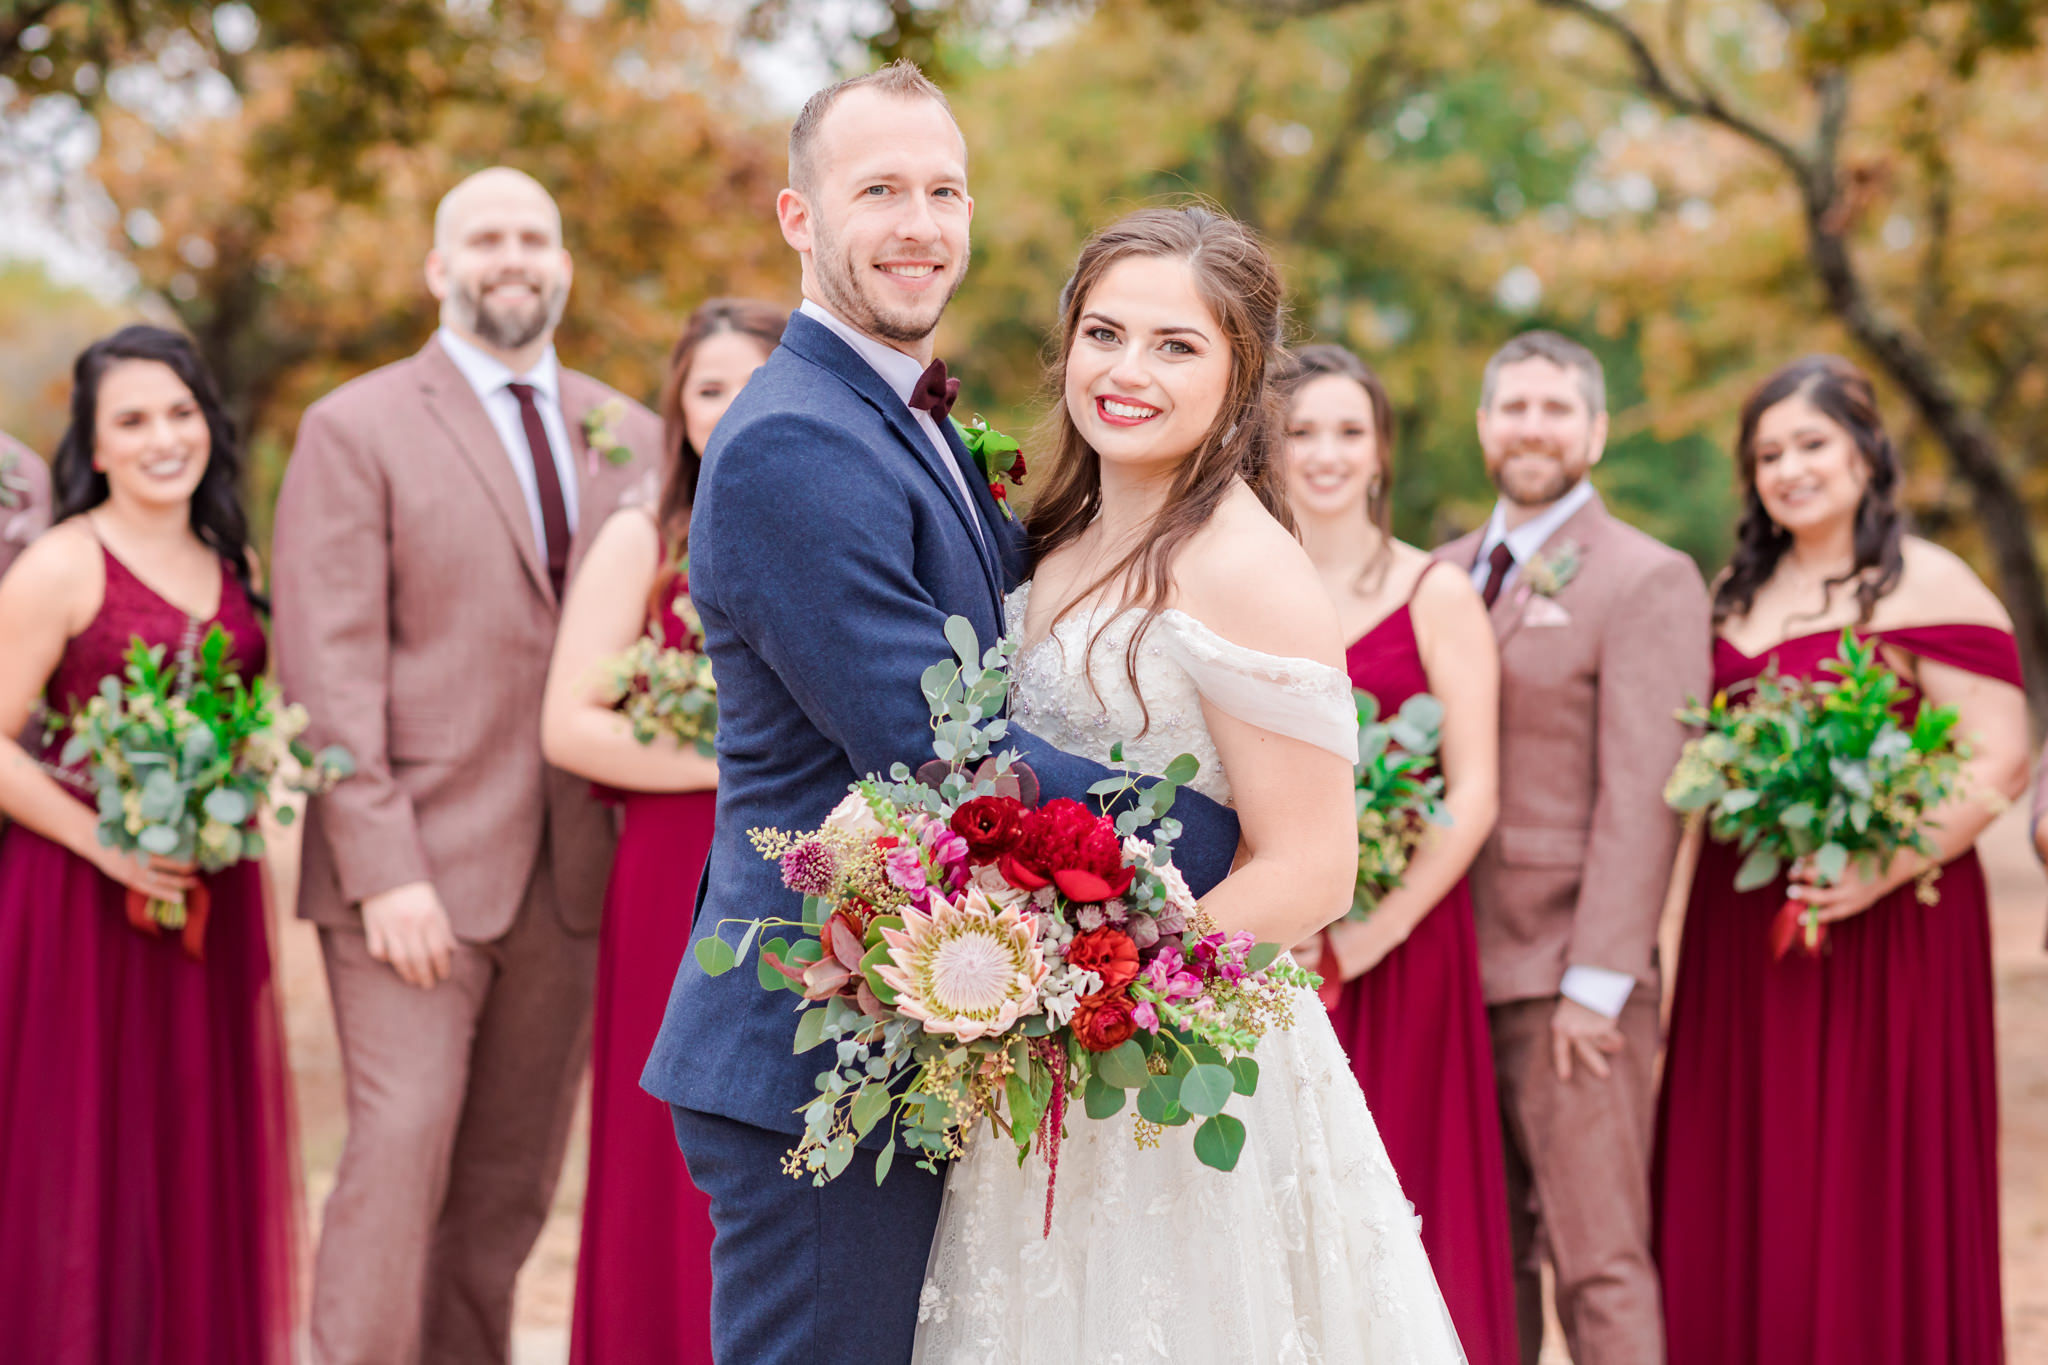 Touch of Whimsy design and coordination, Dawn Elizabeth Photography, Bright and Burgundy Wedding at Swallows Eve